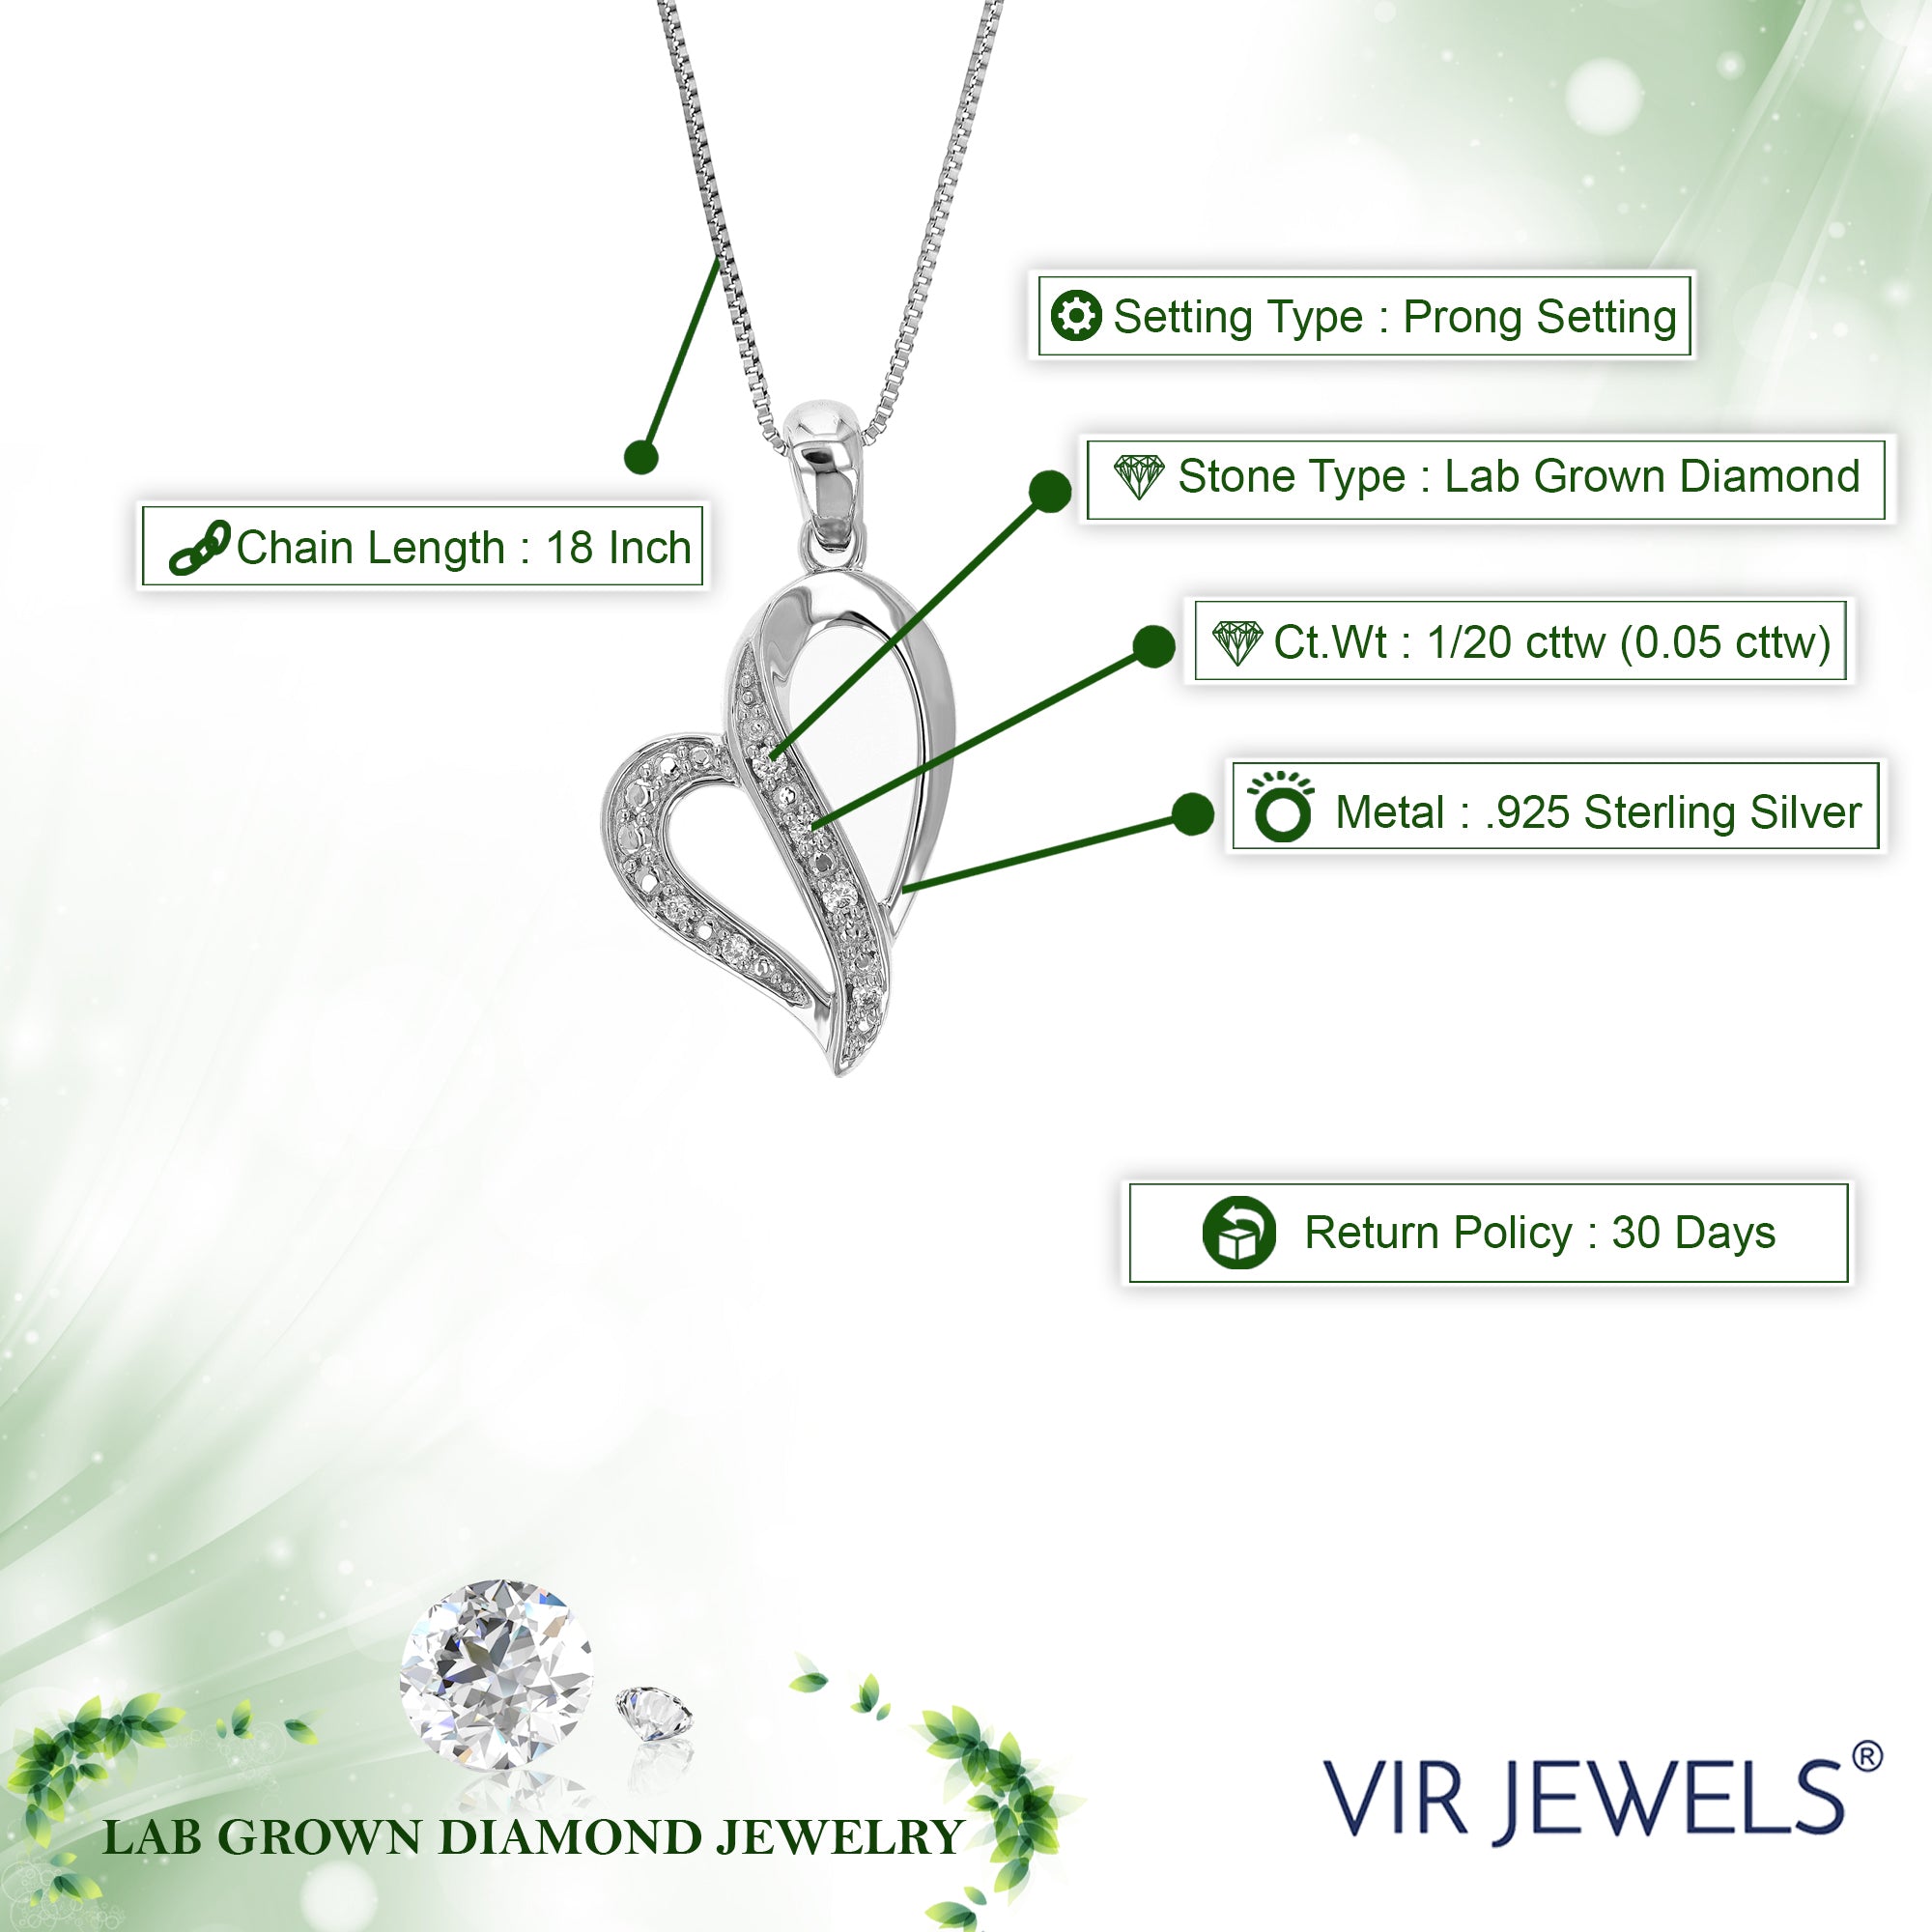 1/20 cttw Lab Grown Diamond Heart Pendant Necklace .925 Sterling Silver 1/2 Inch with 18 Inch Chain, Size 3/4 Inch